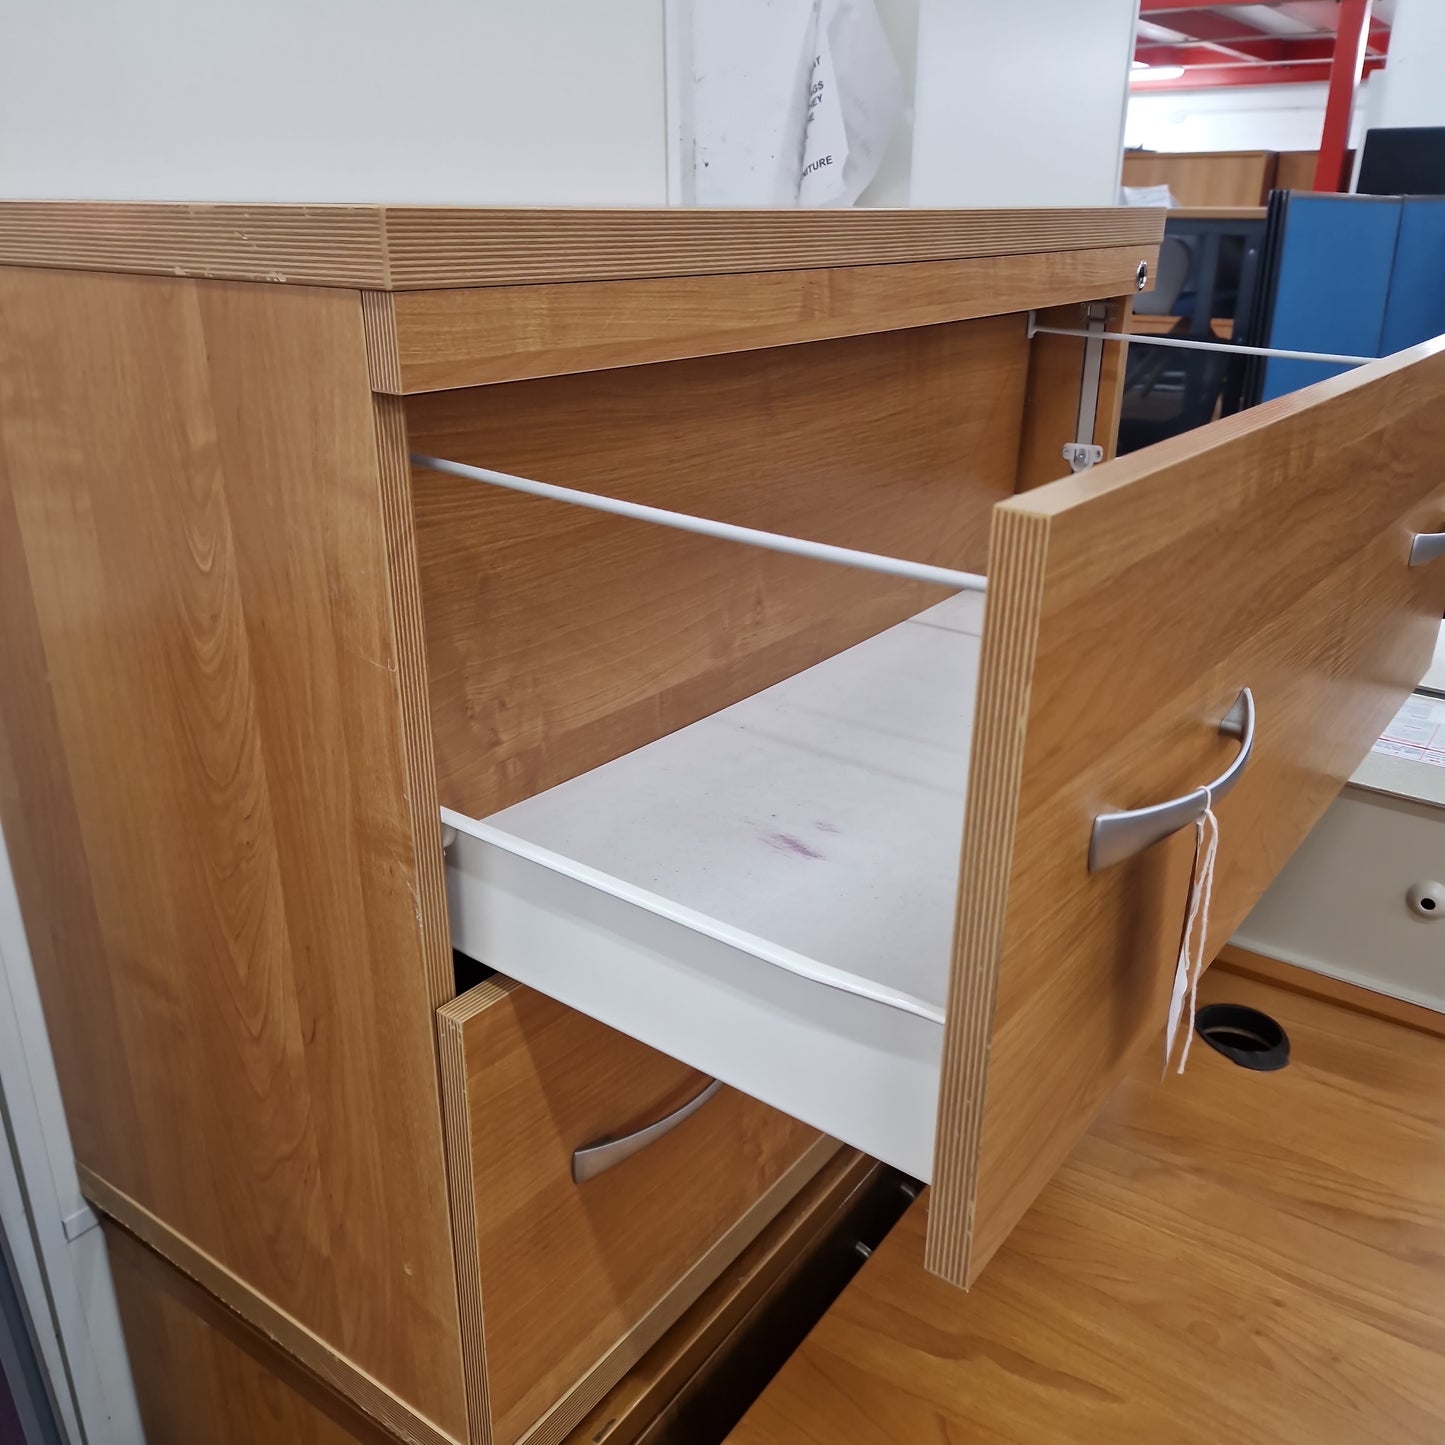 2 drawer lateral filing unit